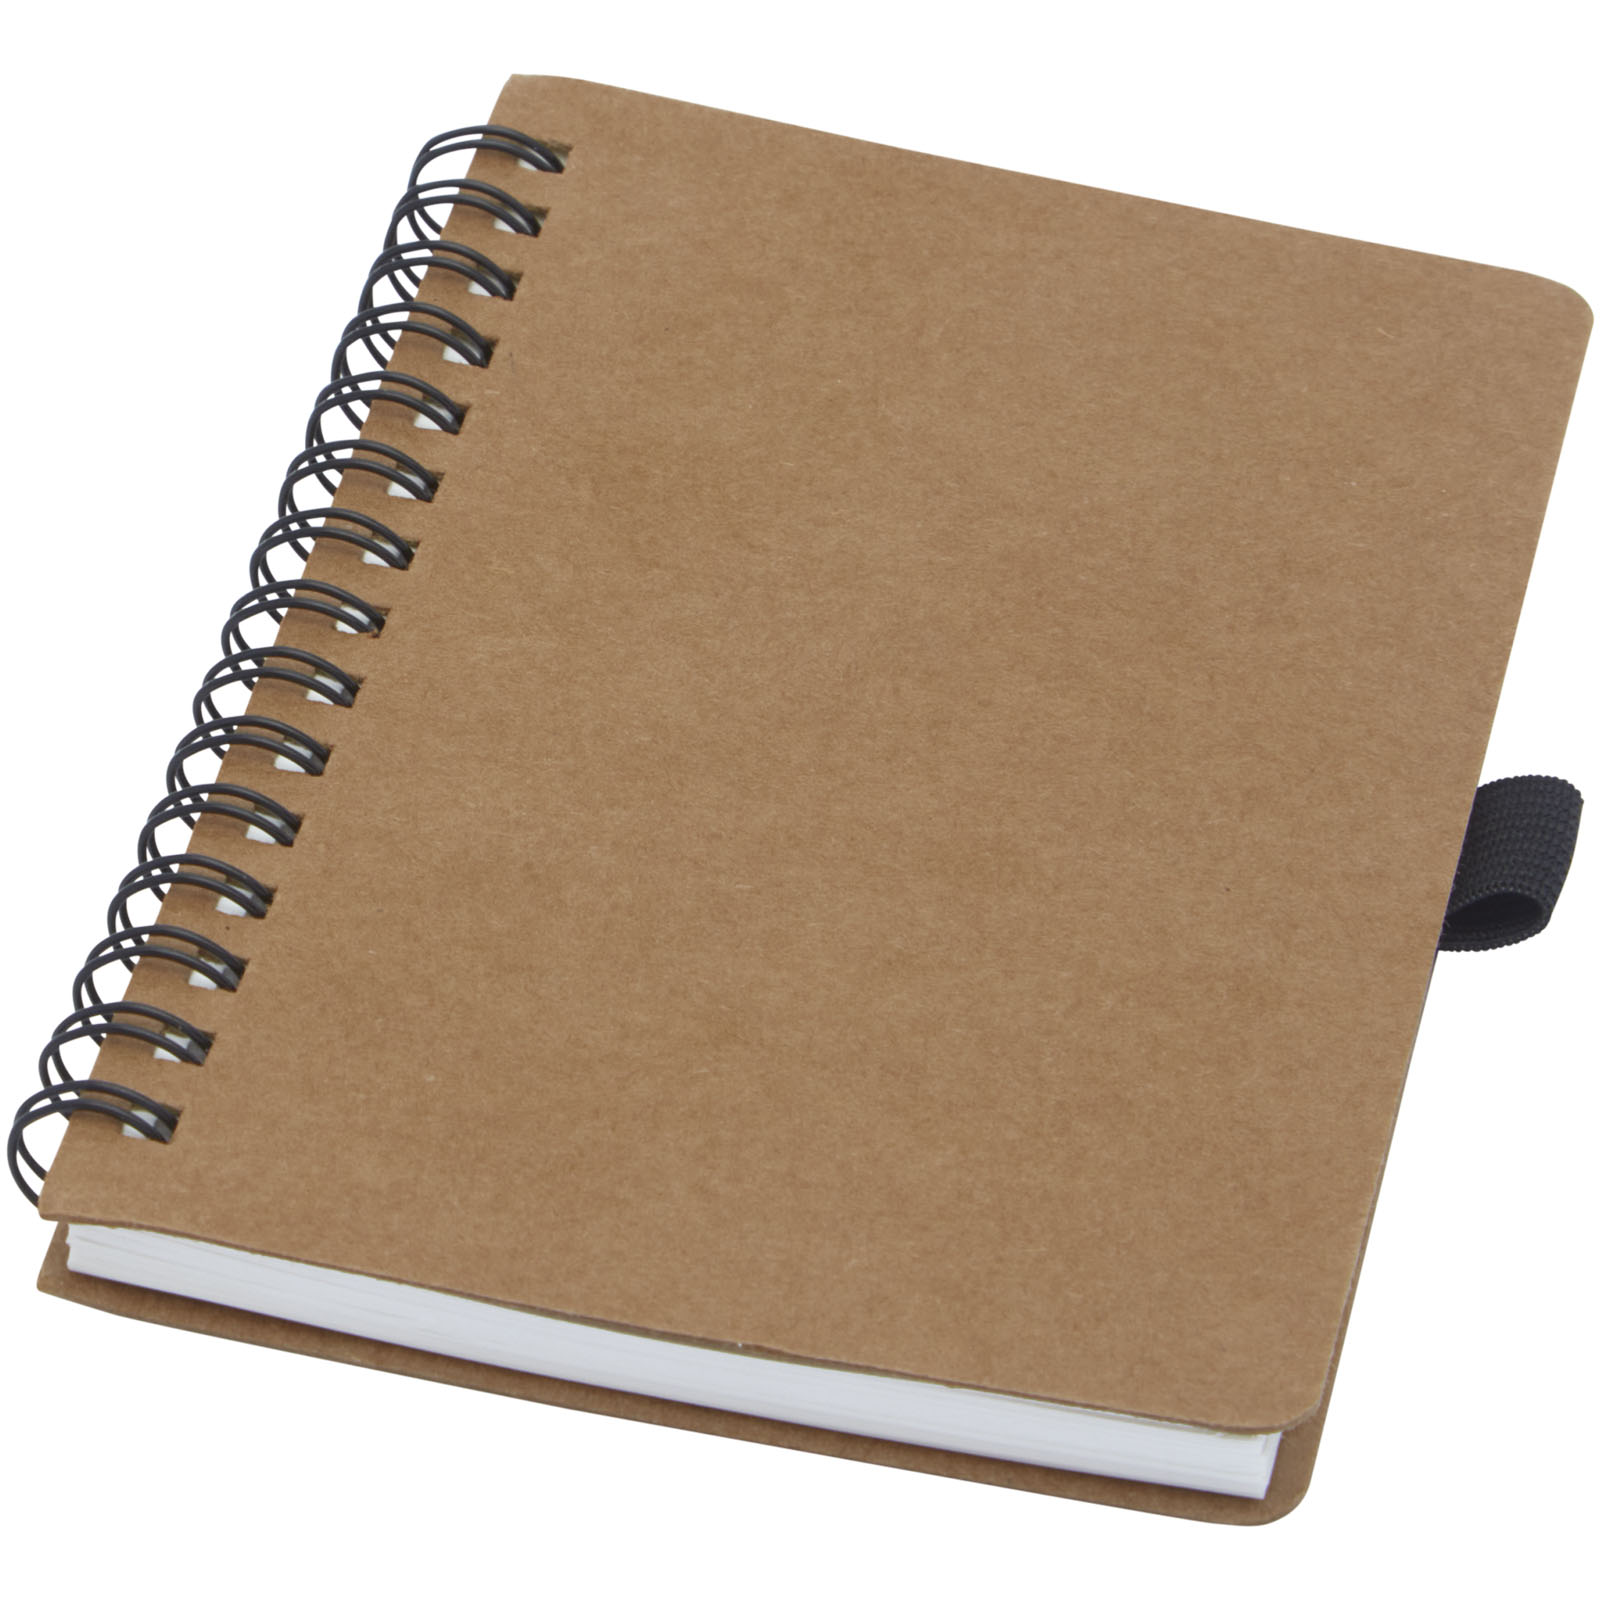 Notebooks - Cobble A6 wire-o recycled cardboard notebook with stone paper